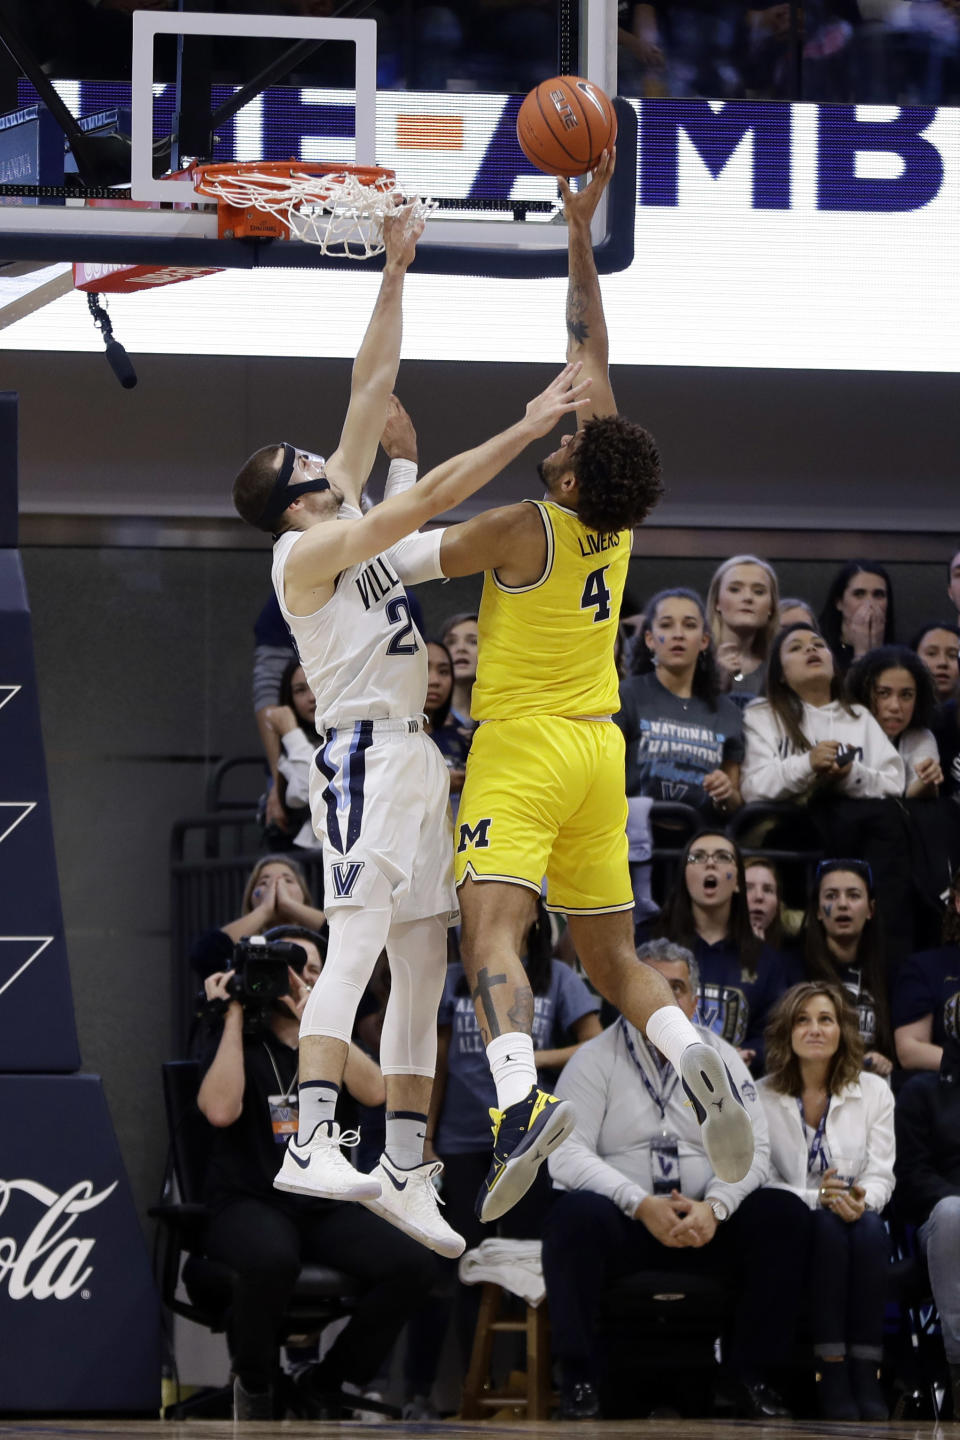 Michigan's Isaiah Livers, right, goes up for a shot against Villanova's Joe Cremo during the first half of an NCAA college basketball game, Wednesday, Nov. 14, 2018, in Villanova. (AP Photo/Matt Slocum)